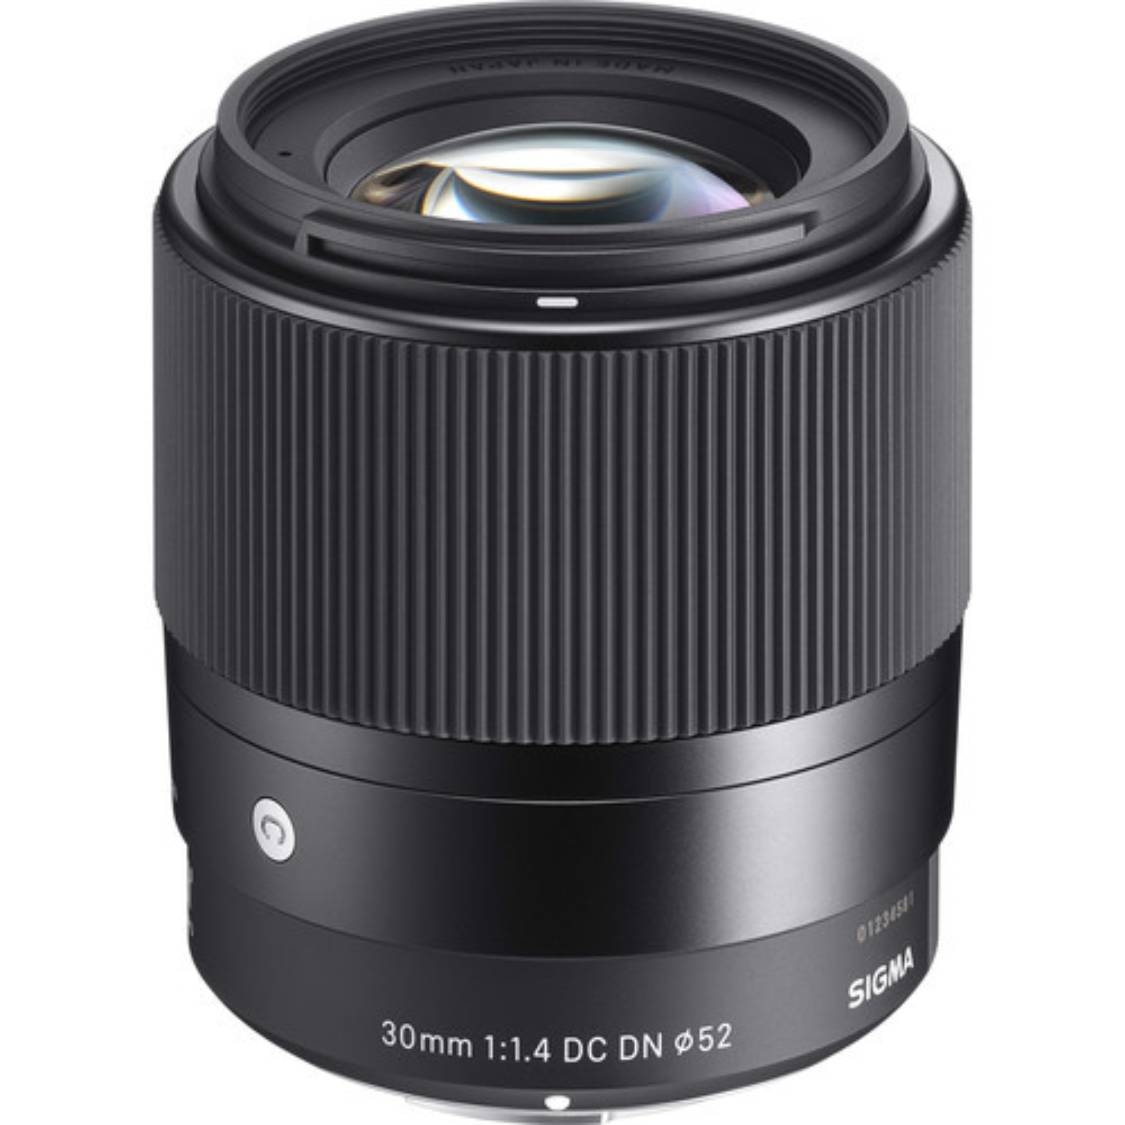 Sigma 30mm F1.4 DC DN Contemporary Lens for Micro Four Thirds Mount